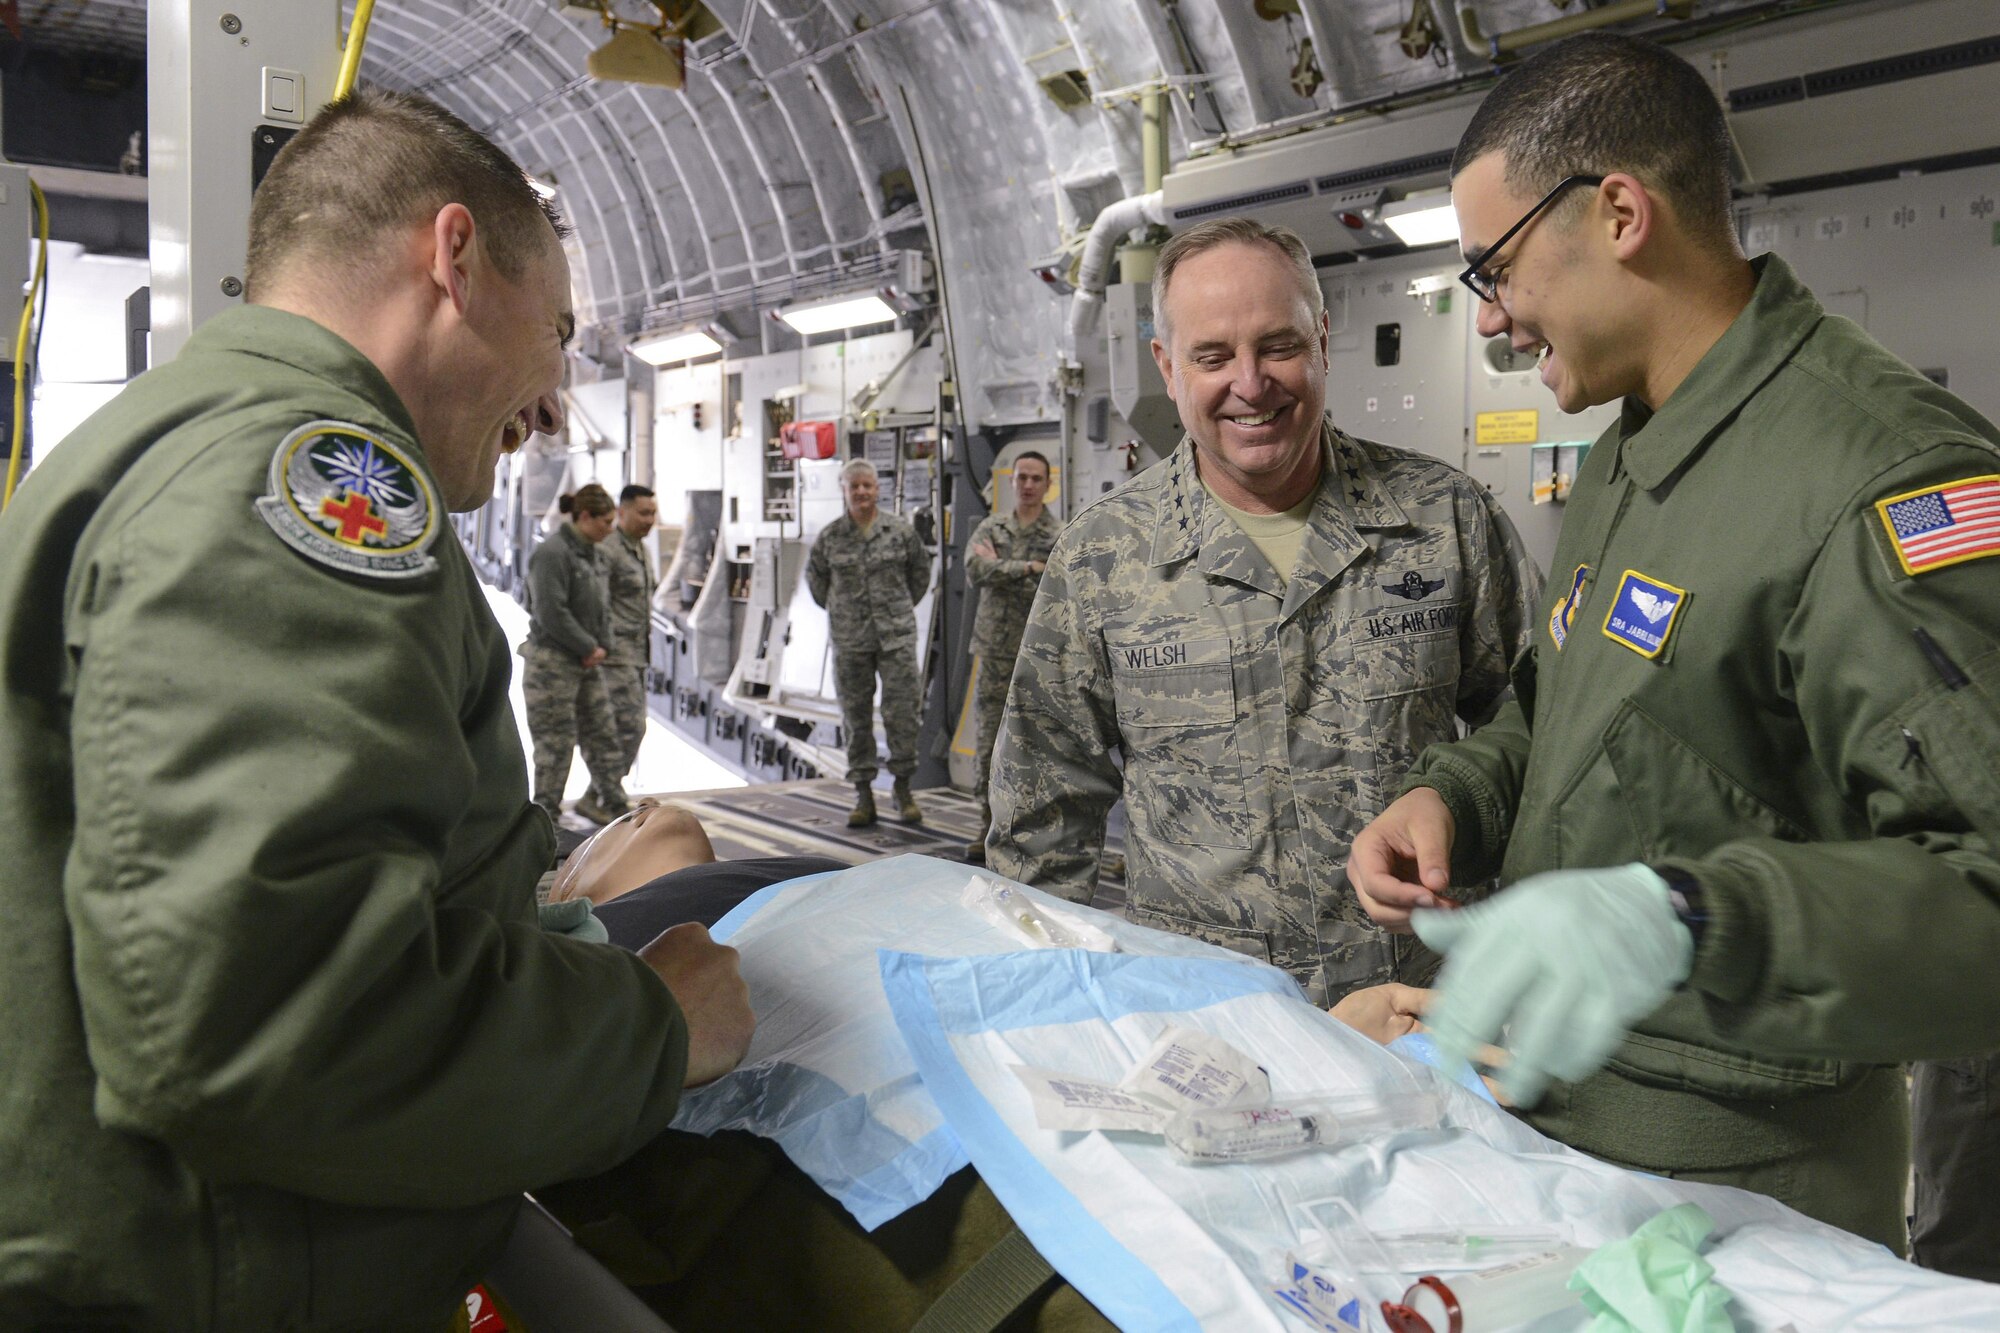 Senior Airman Elijah Burns, left, and Senior Airman Jabril Collins, 446th Aeromedical Evacuation Squadron aeromedical evacuation technicians, perform an IV insertion patient training scenario demonstration for Air Force Chief of Staff Gen. Mark A. Welsh III, Feb. 3, 2014, at Joint Base Lewis-McChord, Wash. Welsh joked with the Airmen, stating that he was glad the "patient" was in their care and not his. (U.S. Air Force photo/Tech. Sgt. Sean Tobin)